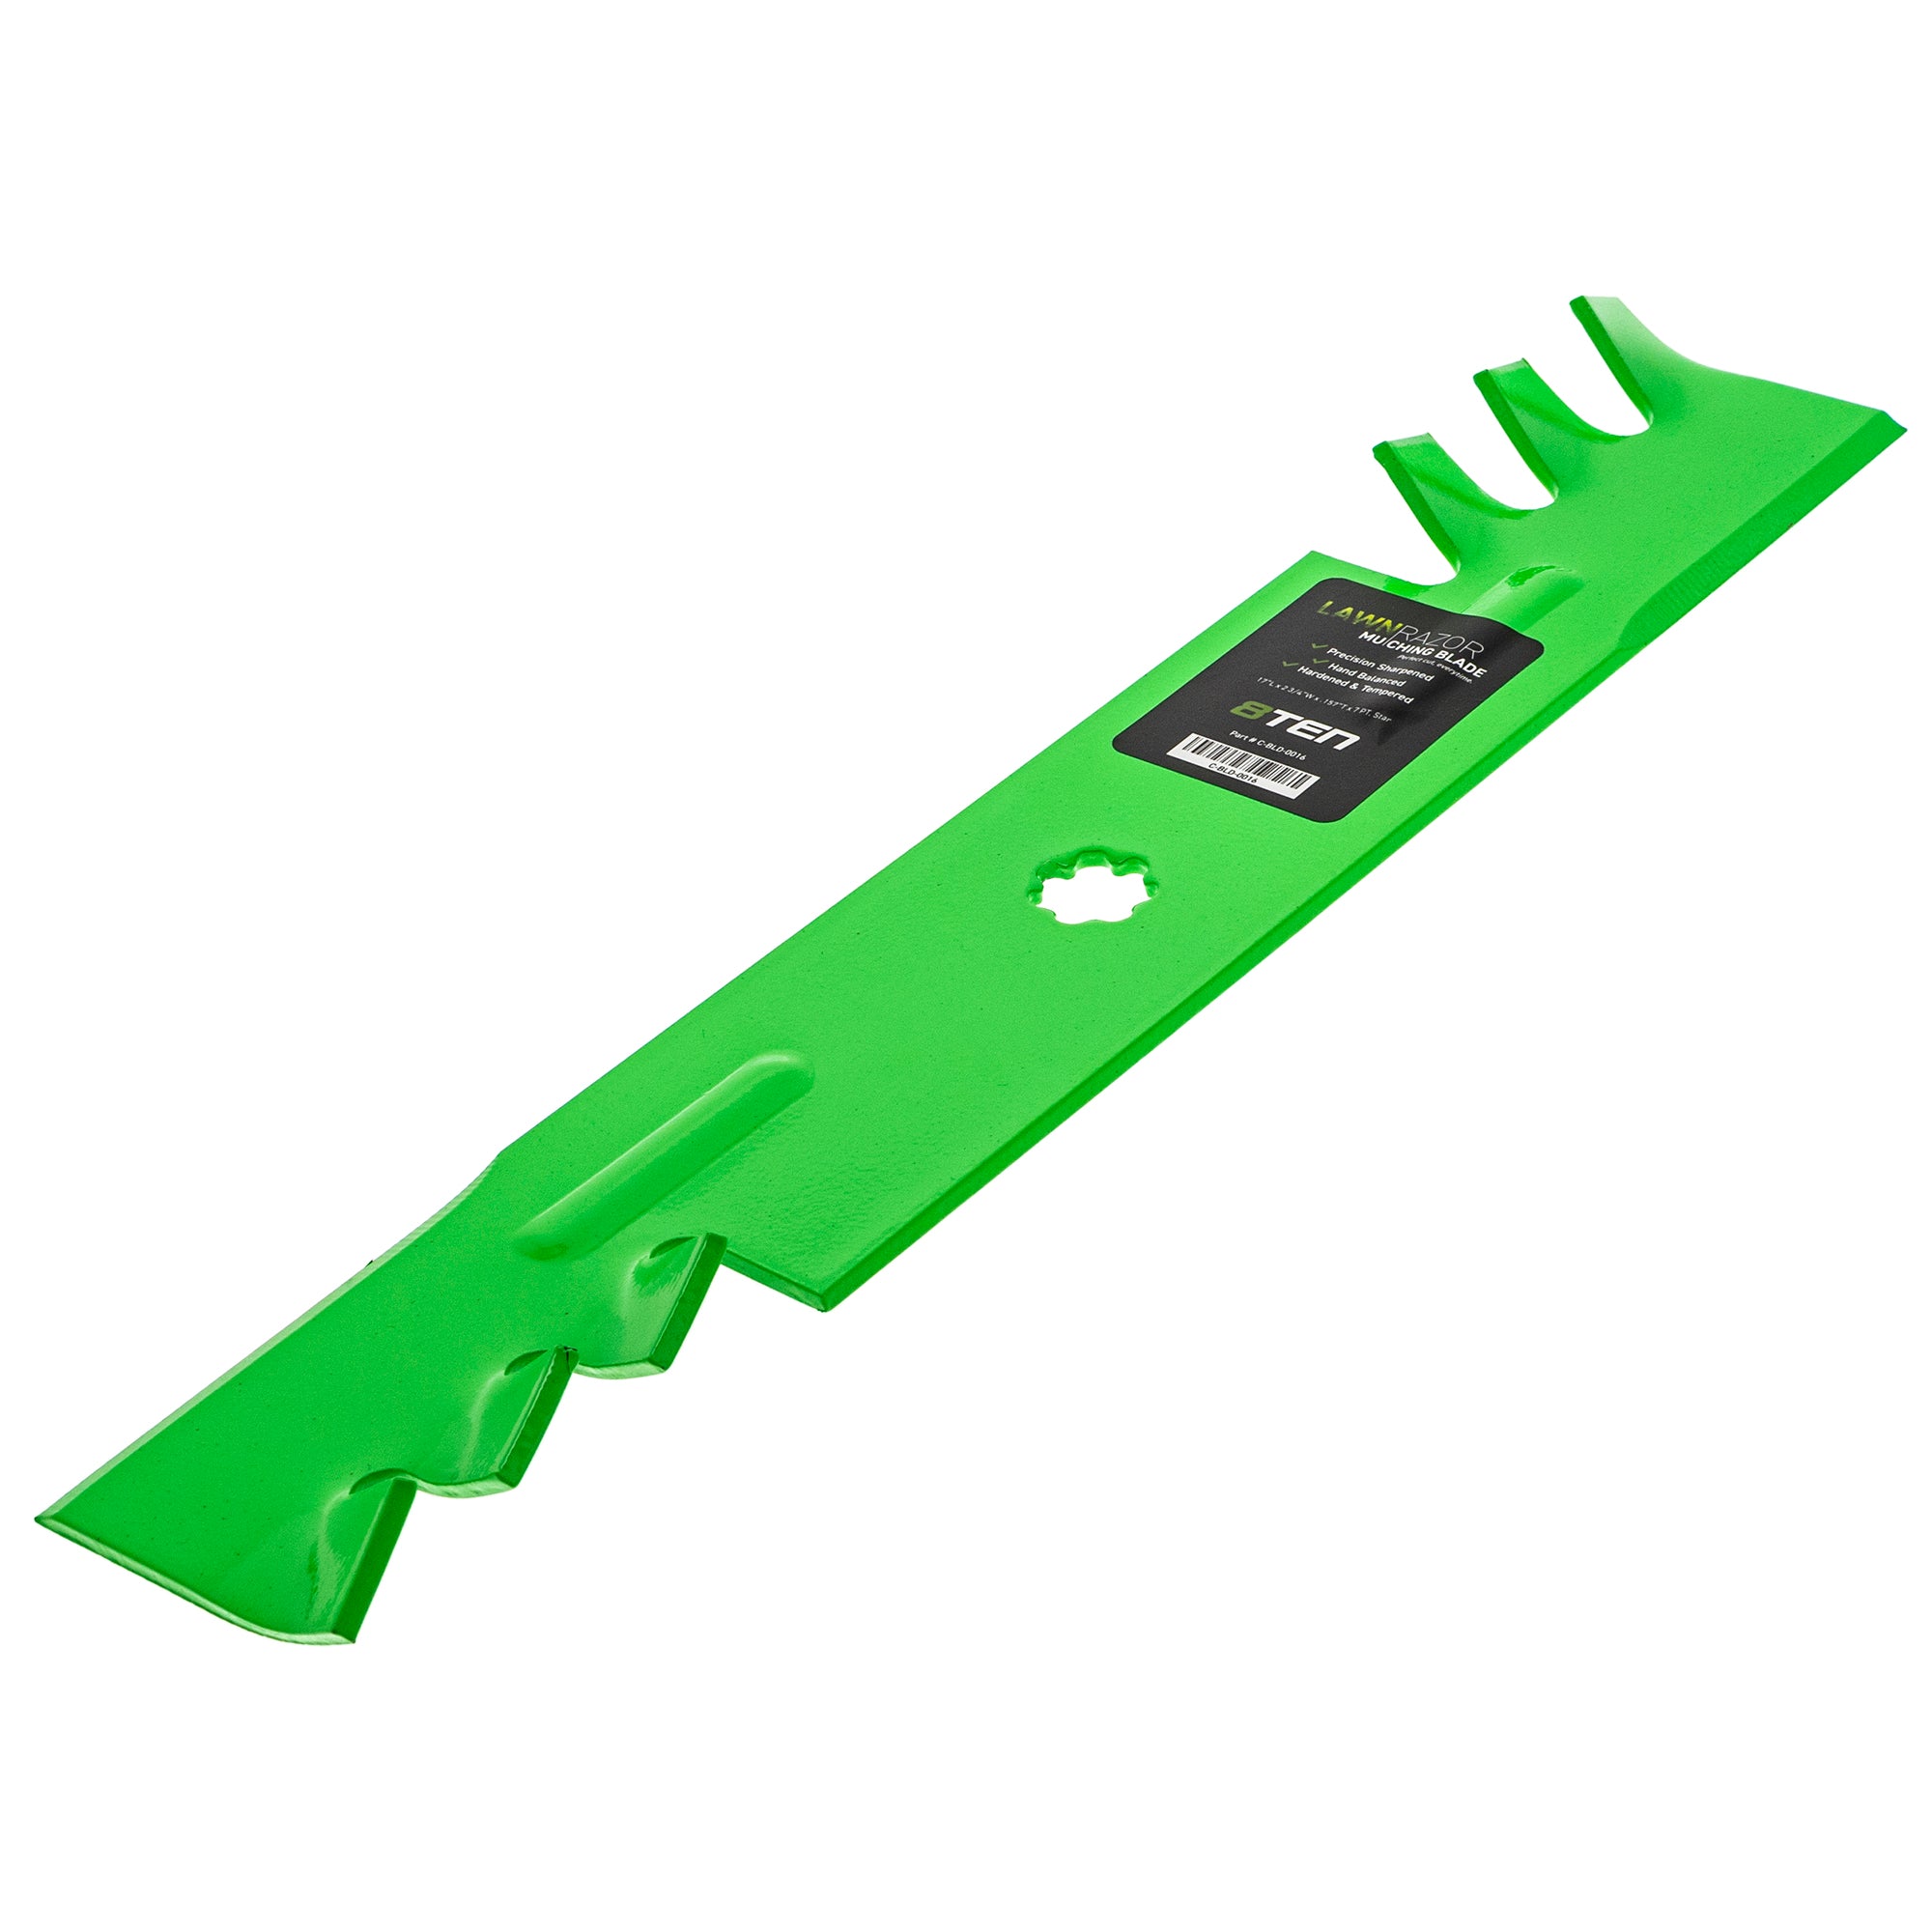 LawnRAZOR Blade Set for John Deere AM141035 GX21784 GX21786 Toothed